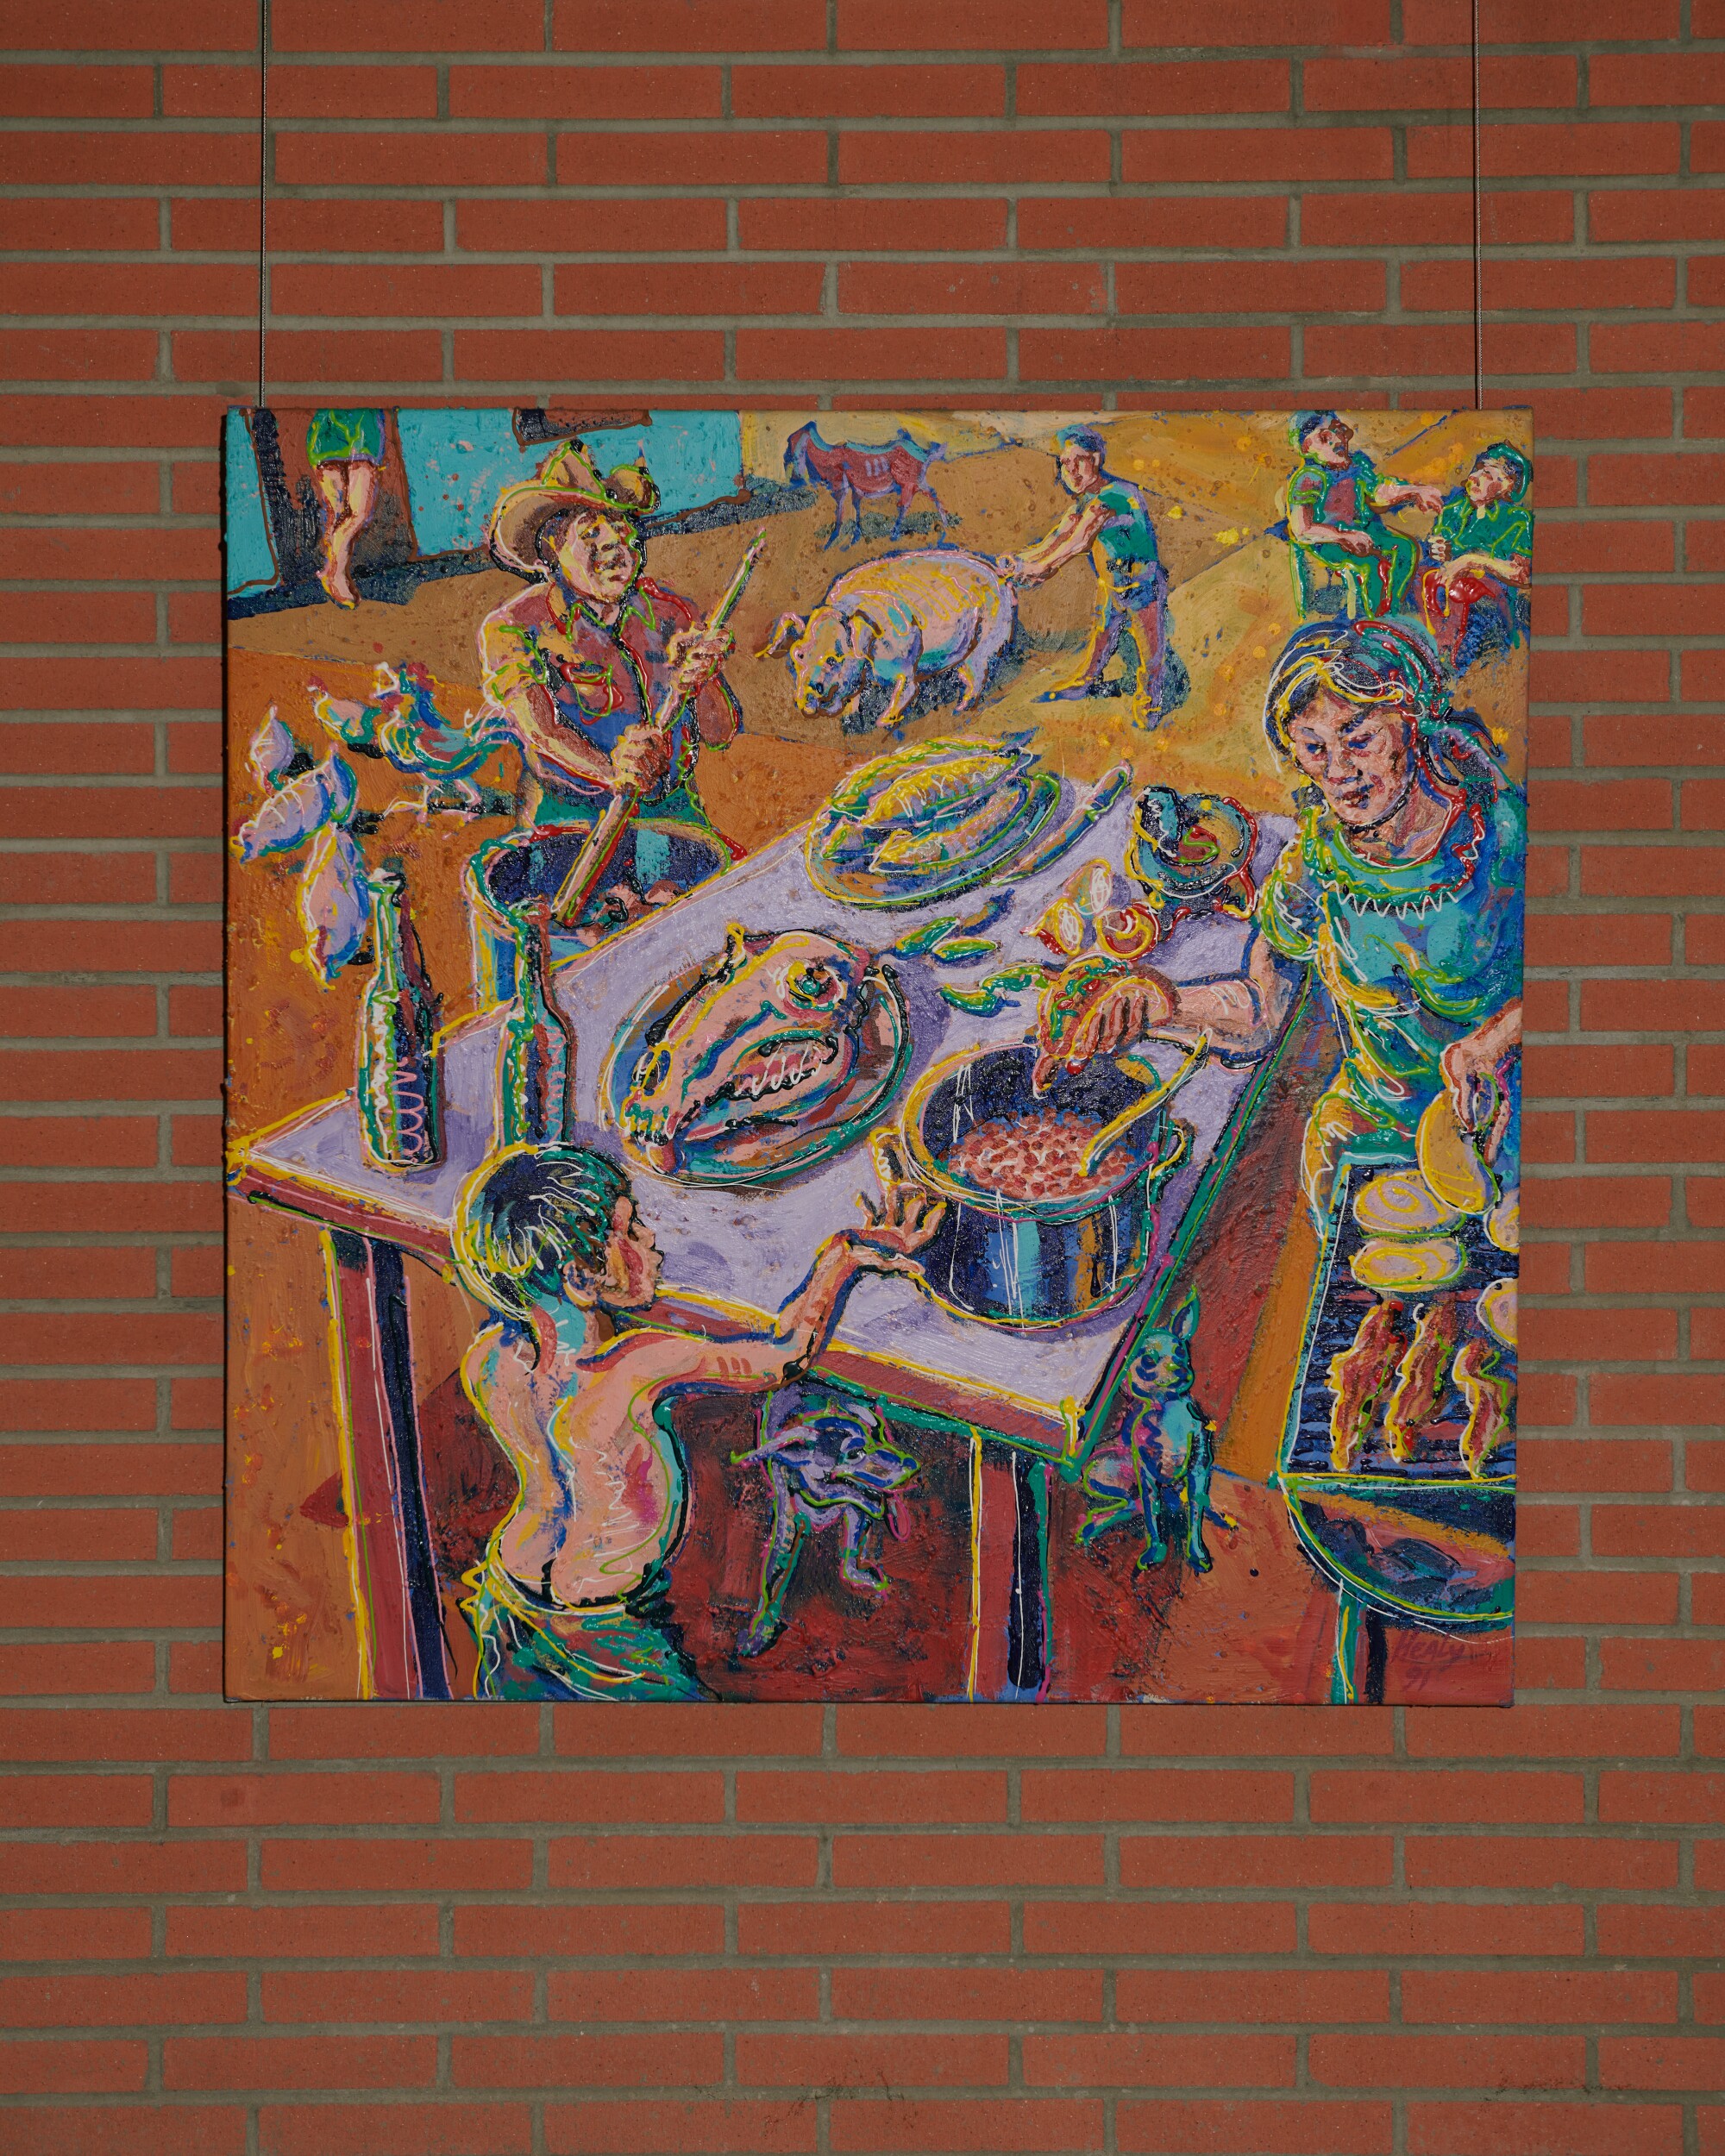 A colorful painting of a family cooking a meal outdoors hangs on a brick wall.